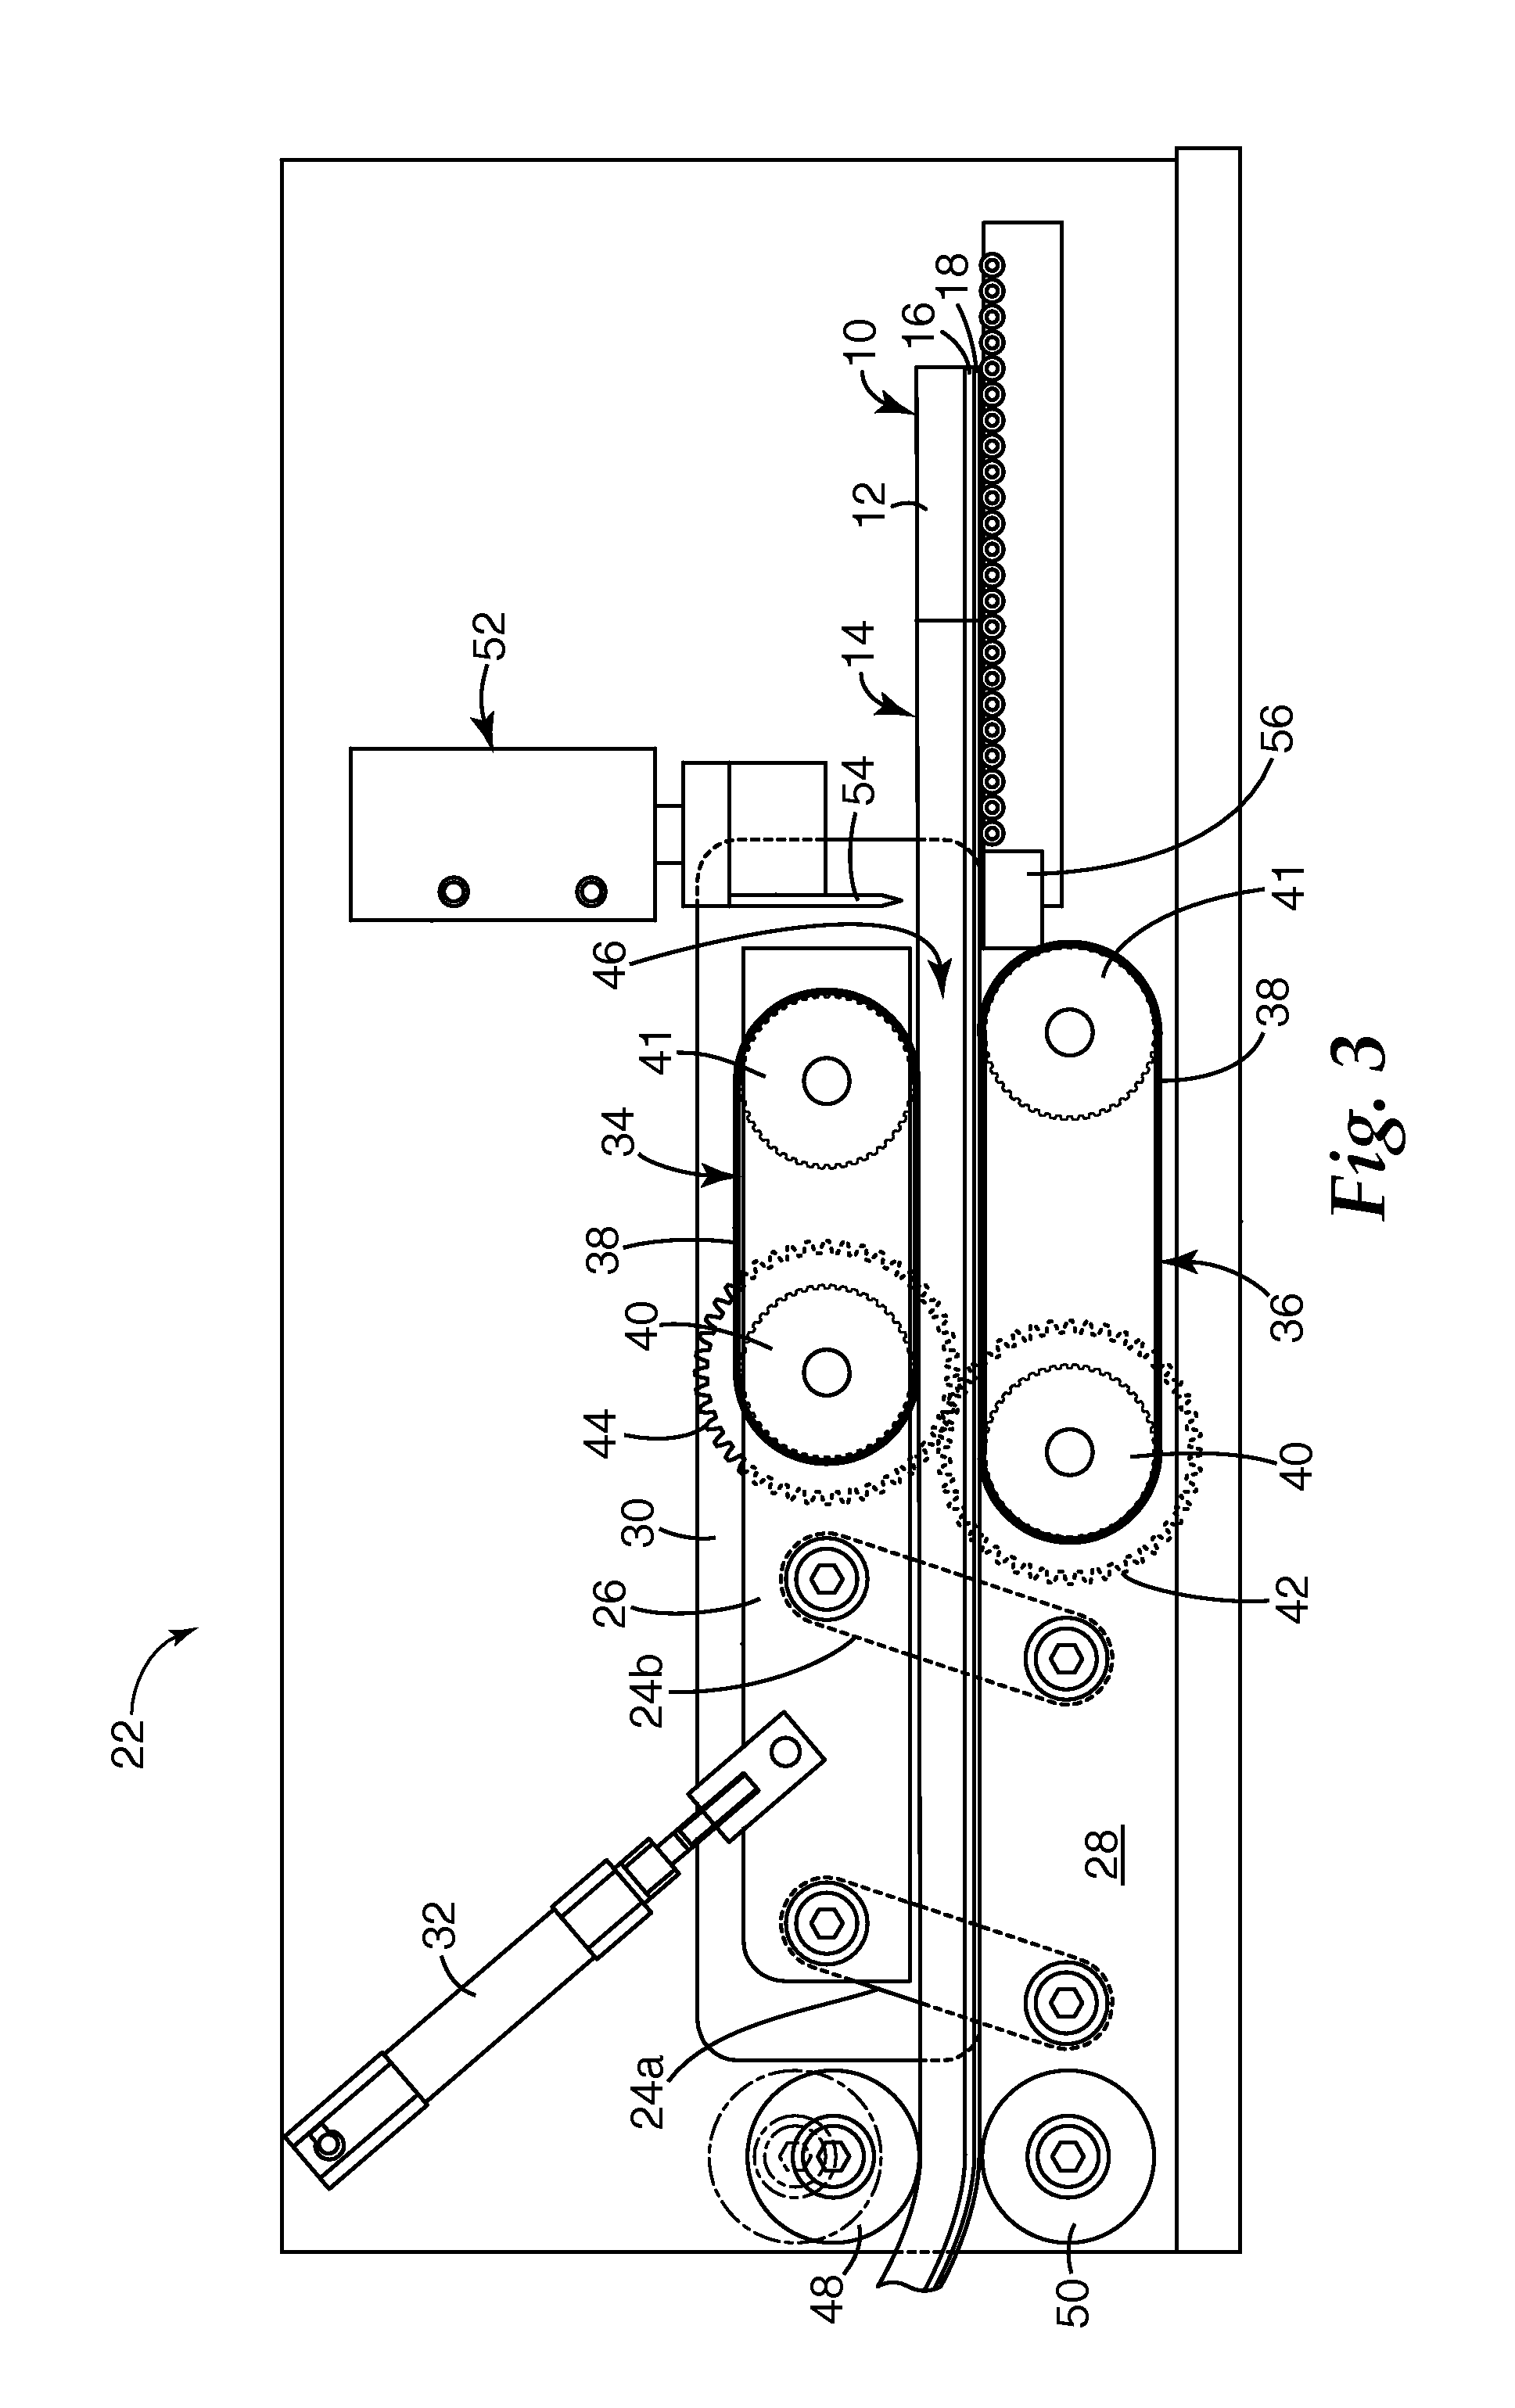 Apparatus and method for dispensing vehicle ballasting weights